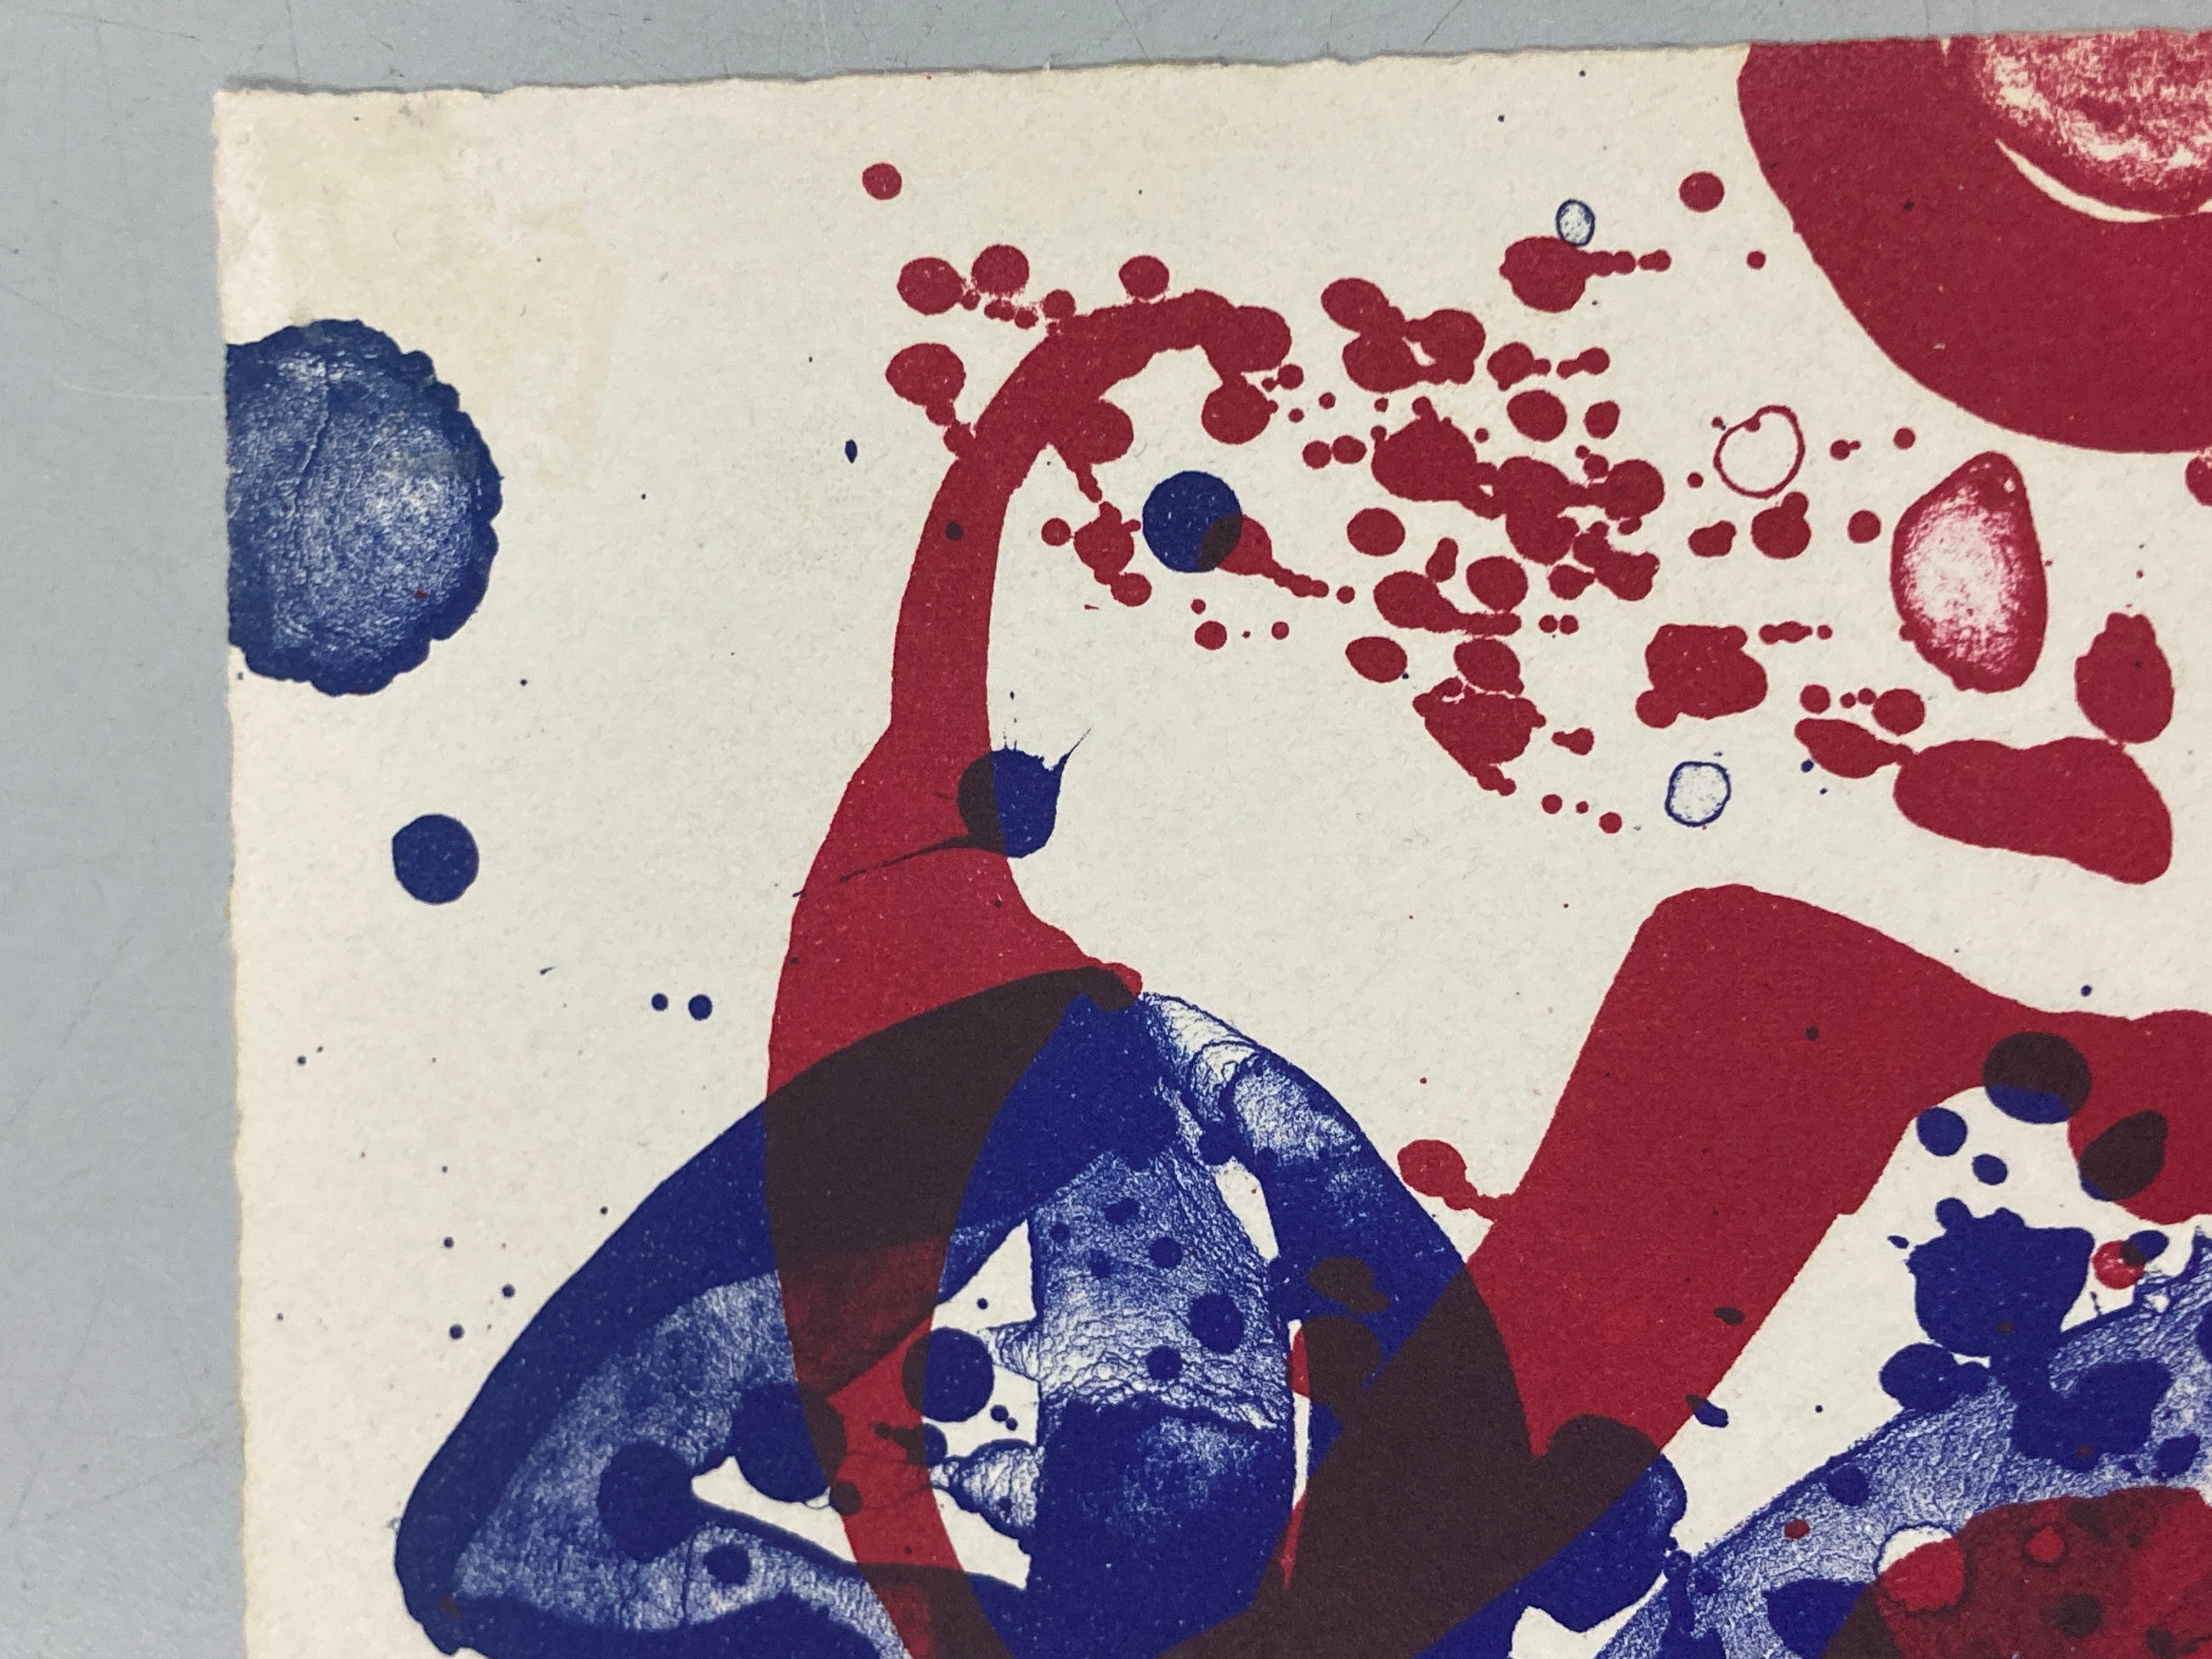 An 8 Set--3 * An 8 Set--5 - Abstract Expressionist Print by Sam Francis